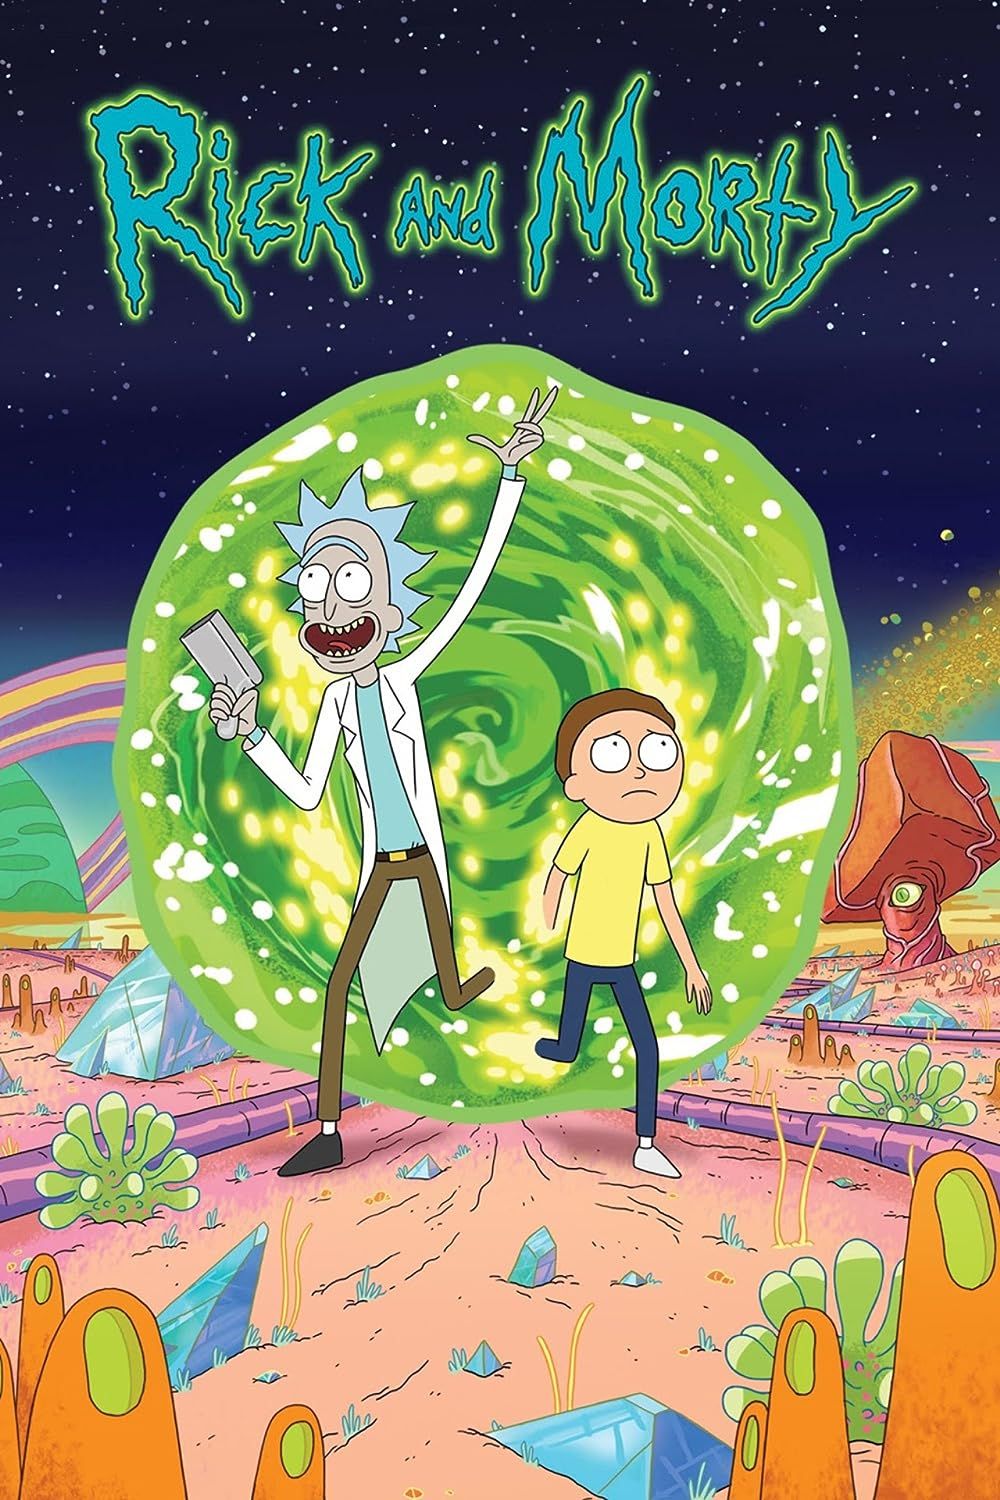 Rick and Morty Season 1 (2013) English Complete Series download full movie